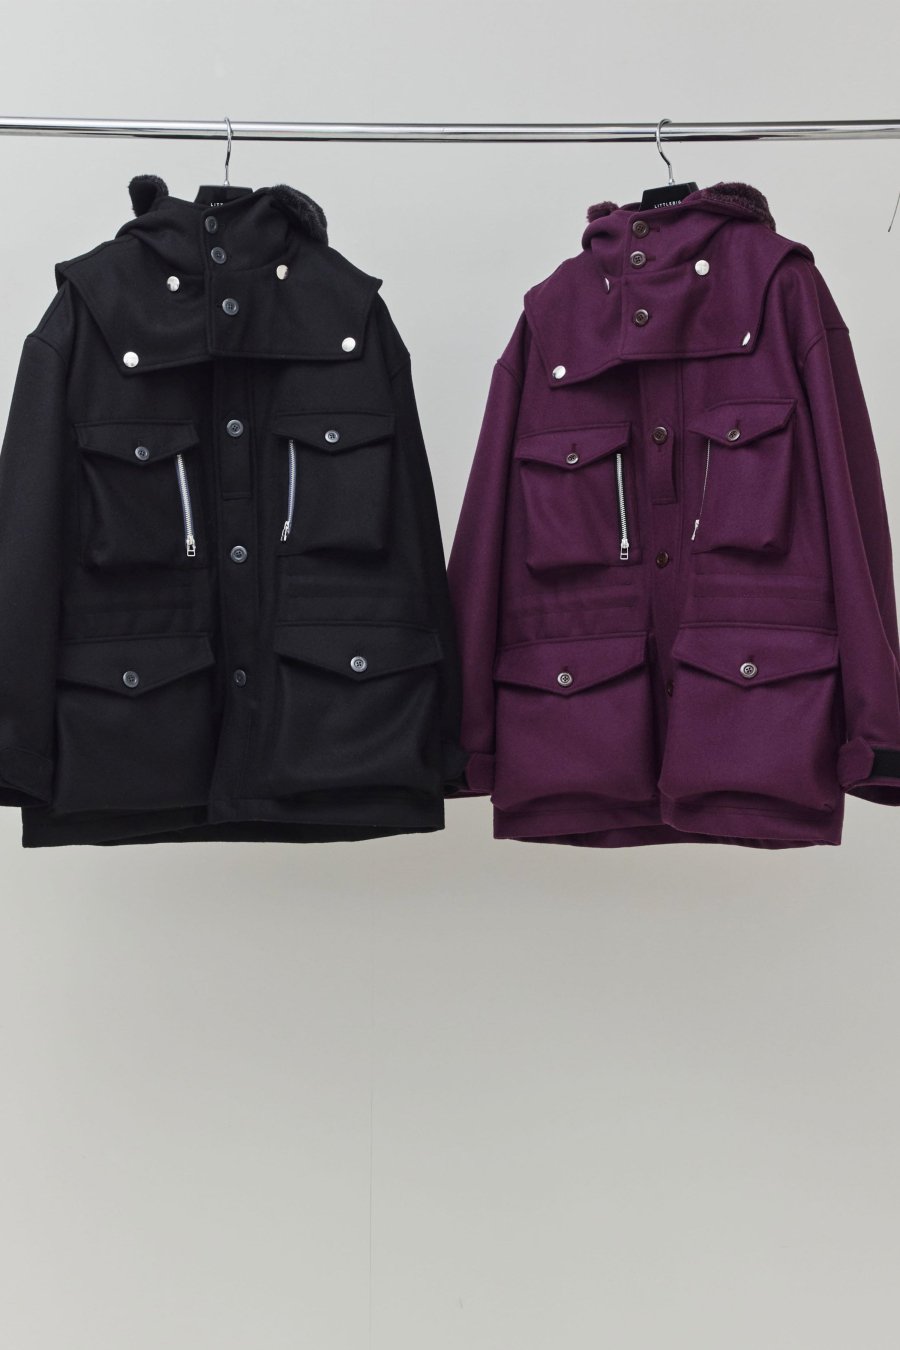 LITTLEBIG 22aw Hooded Blouson(Black)<img class='new_mark_img2' src='https://img.shop-pro.jp/img/new/icons15.gif' style='border:none;display:inline;margin:0px;padding:0px;width:auto;' />